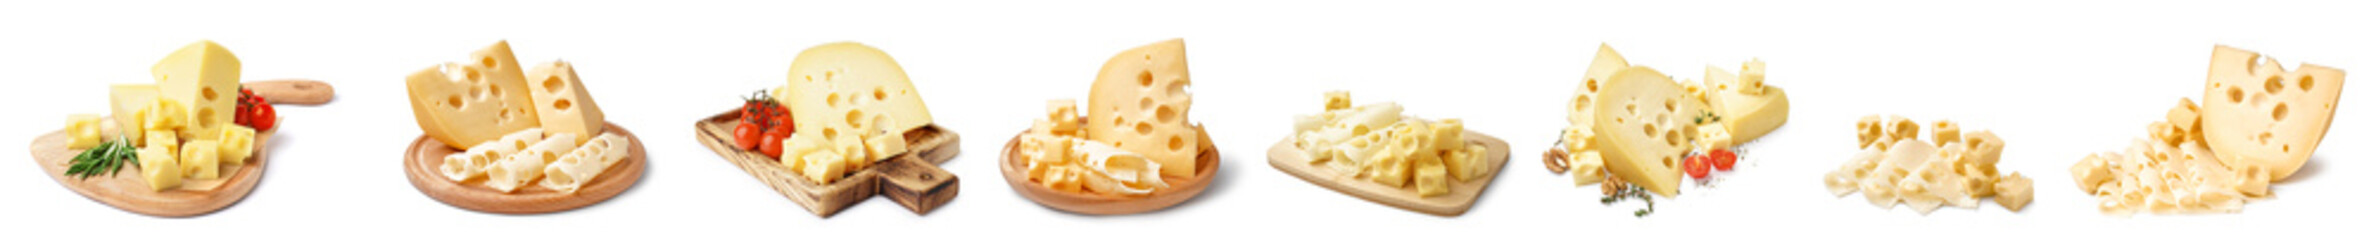 Set of tasty Swiss cheese on white background